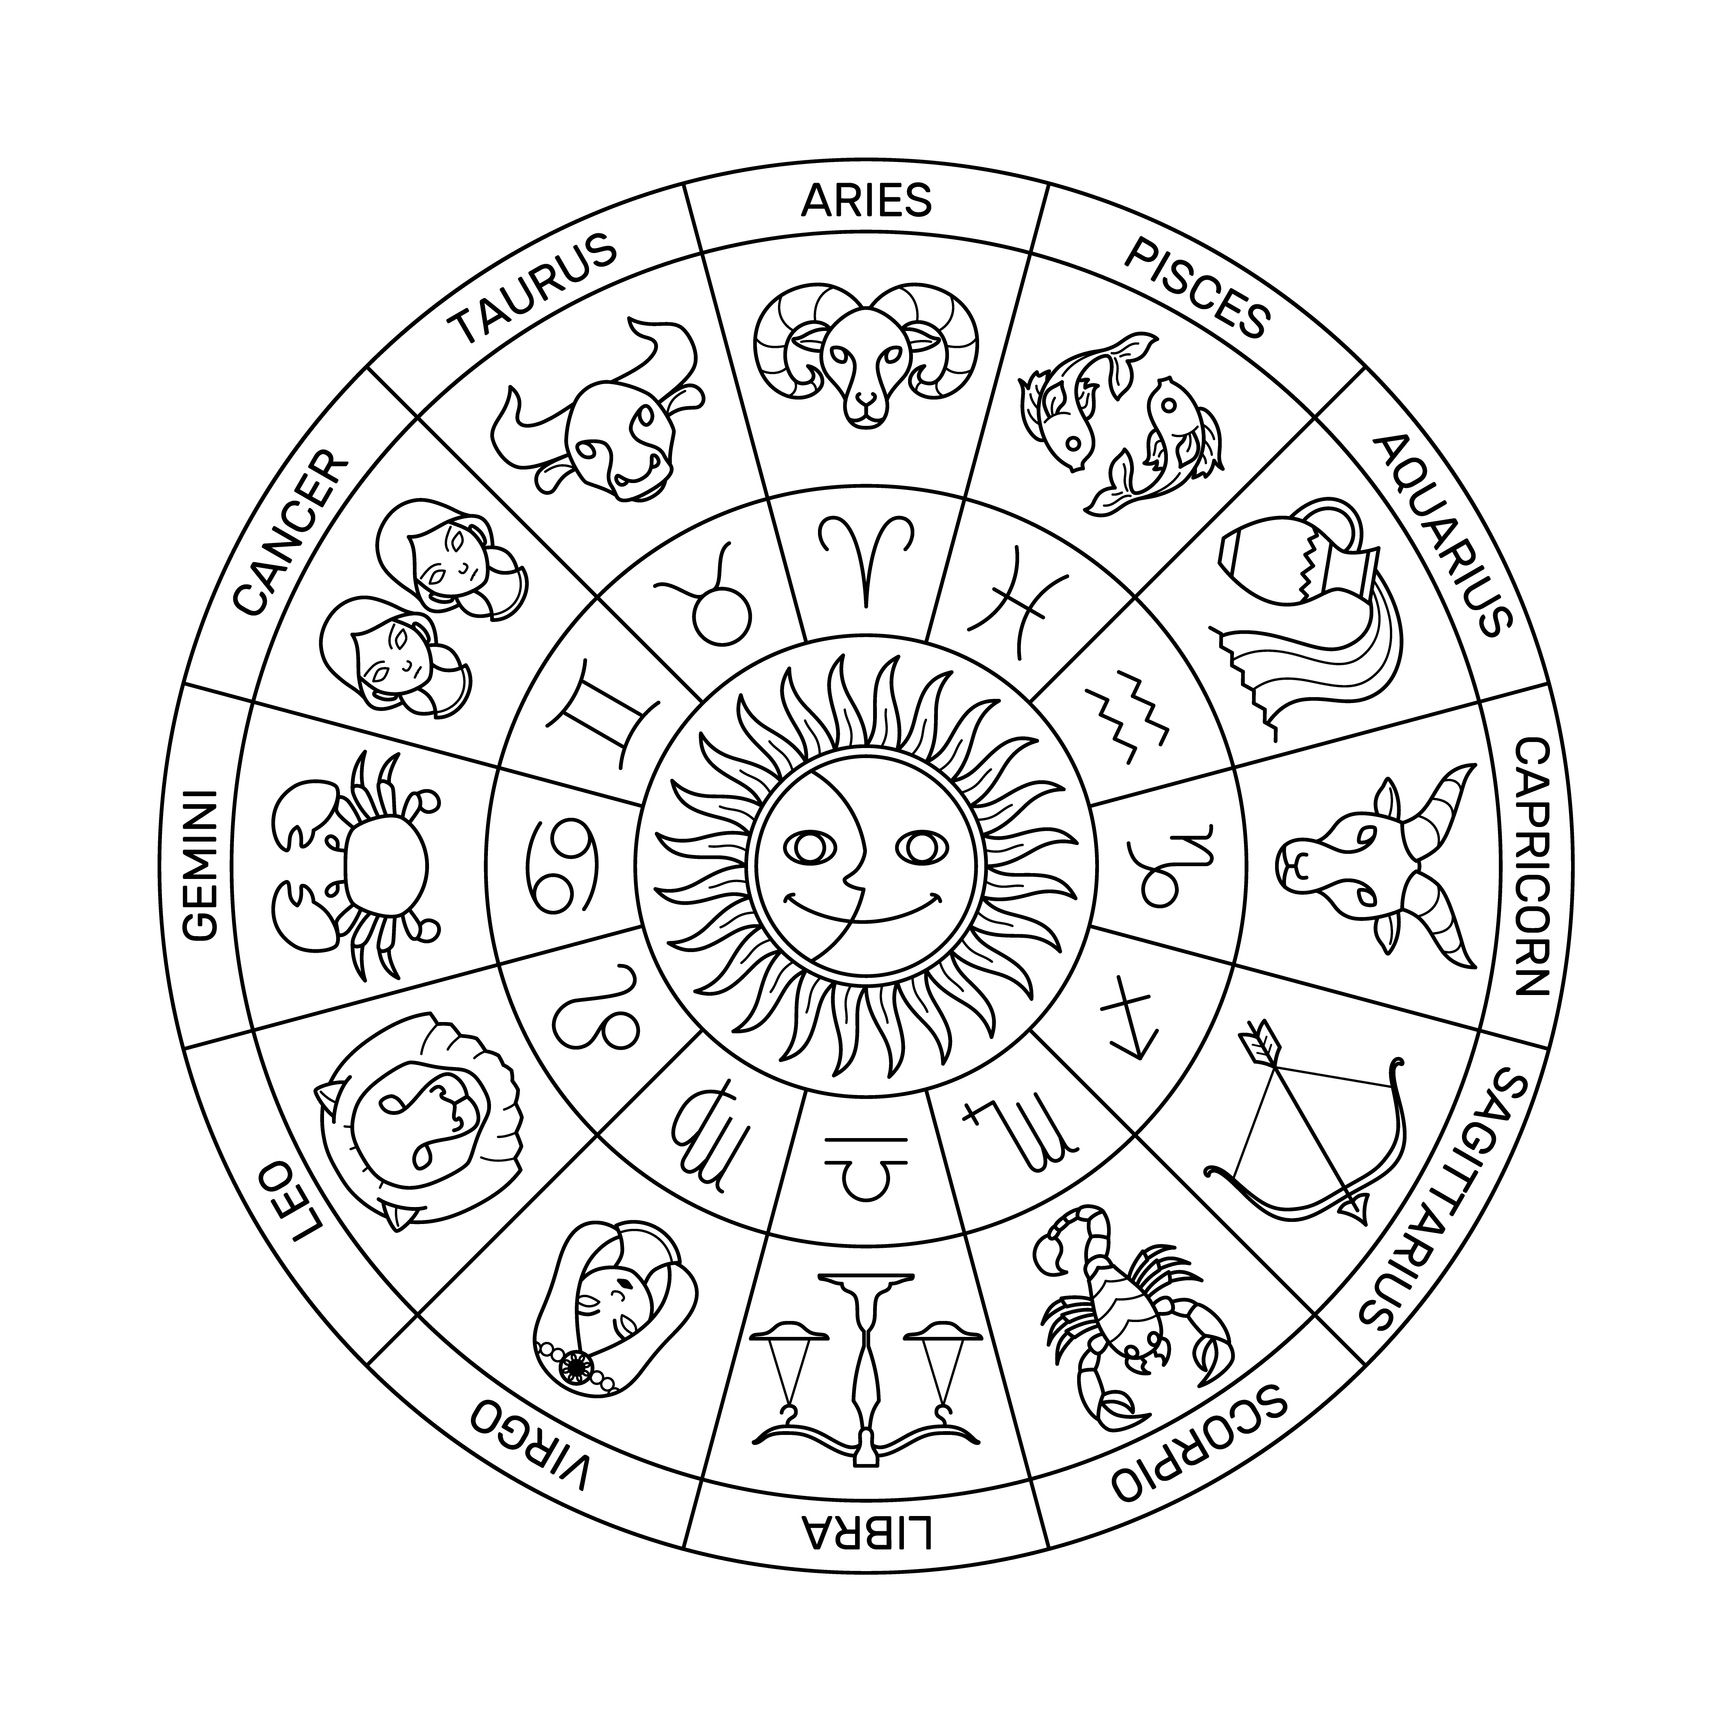 capricorn compatibility chart with other signs